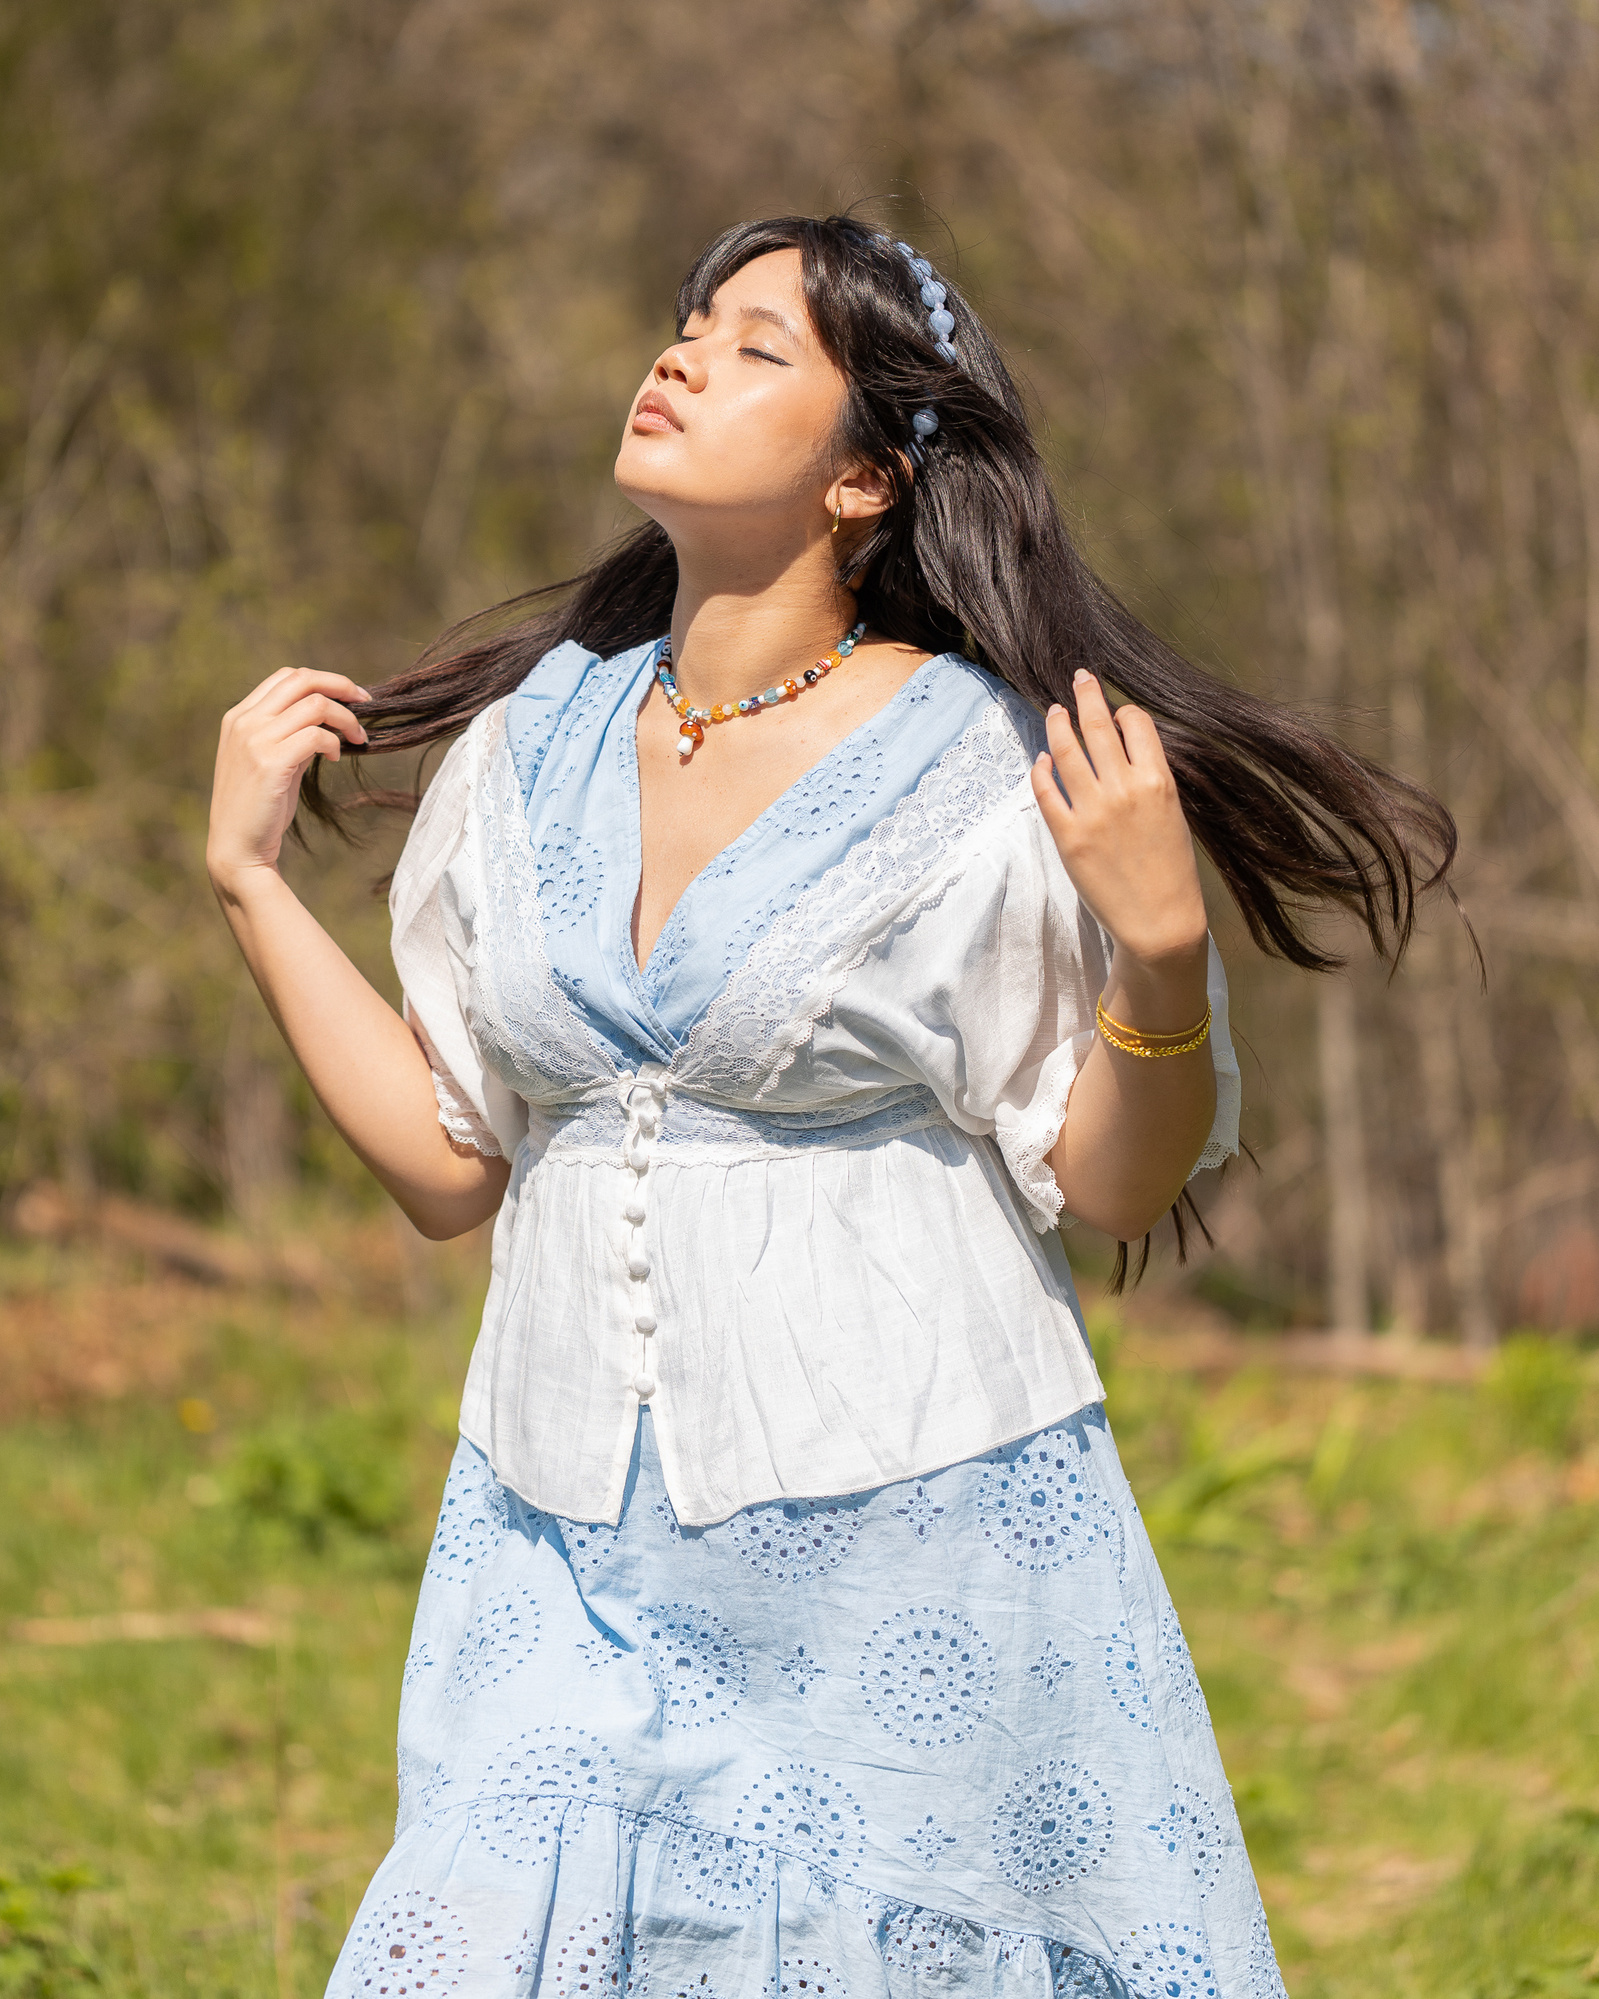 Portrait of Asian woman looking towards sun with hair blowing in wind, wearing blue lacey dress.